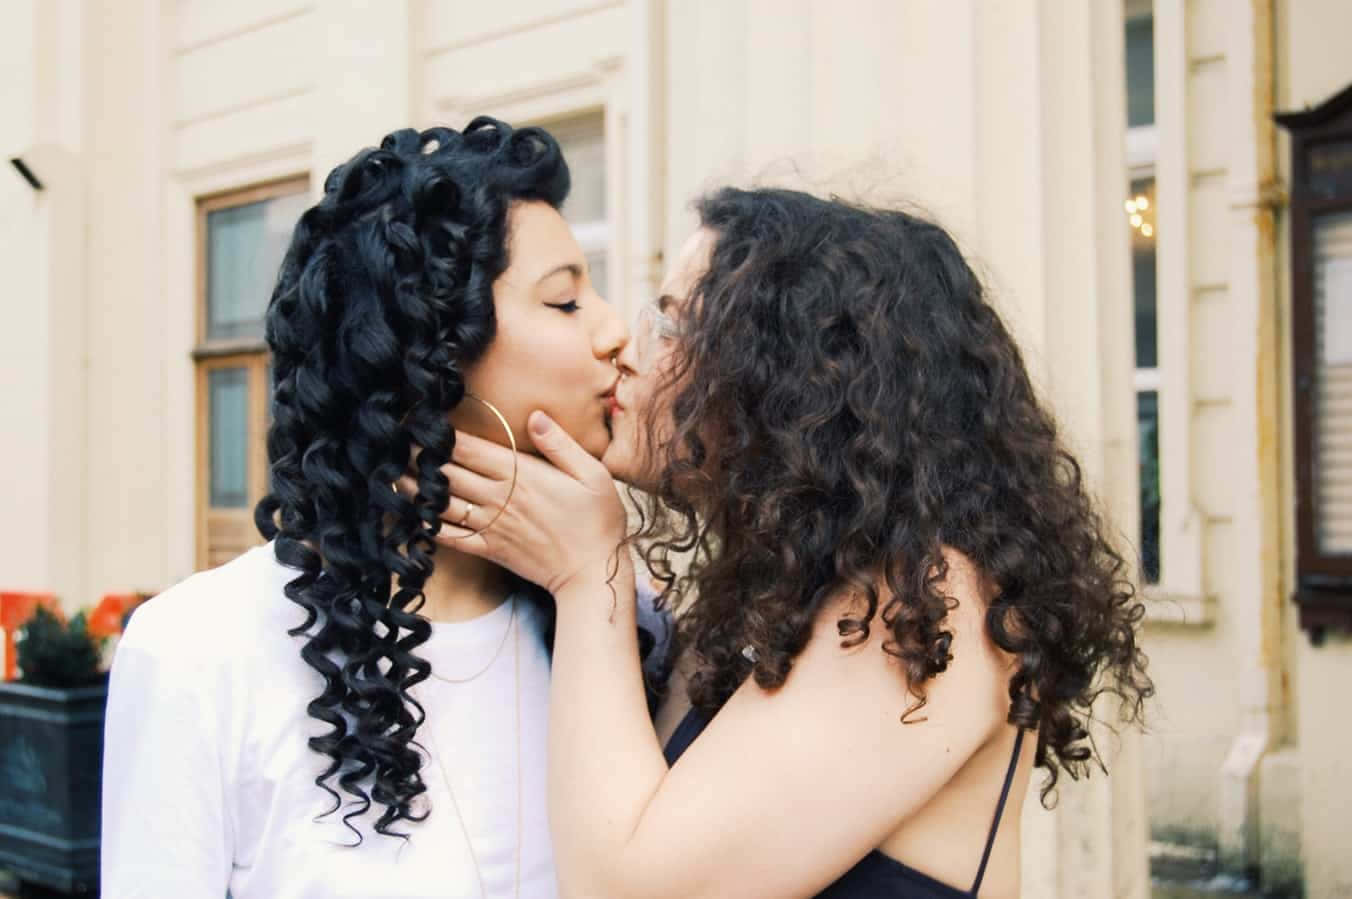 Curly Haired Mujeres Lesbianas Wallpaper